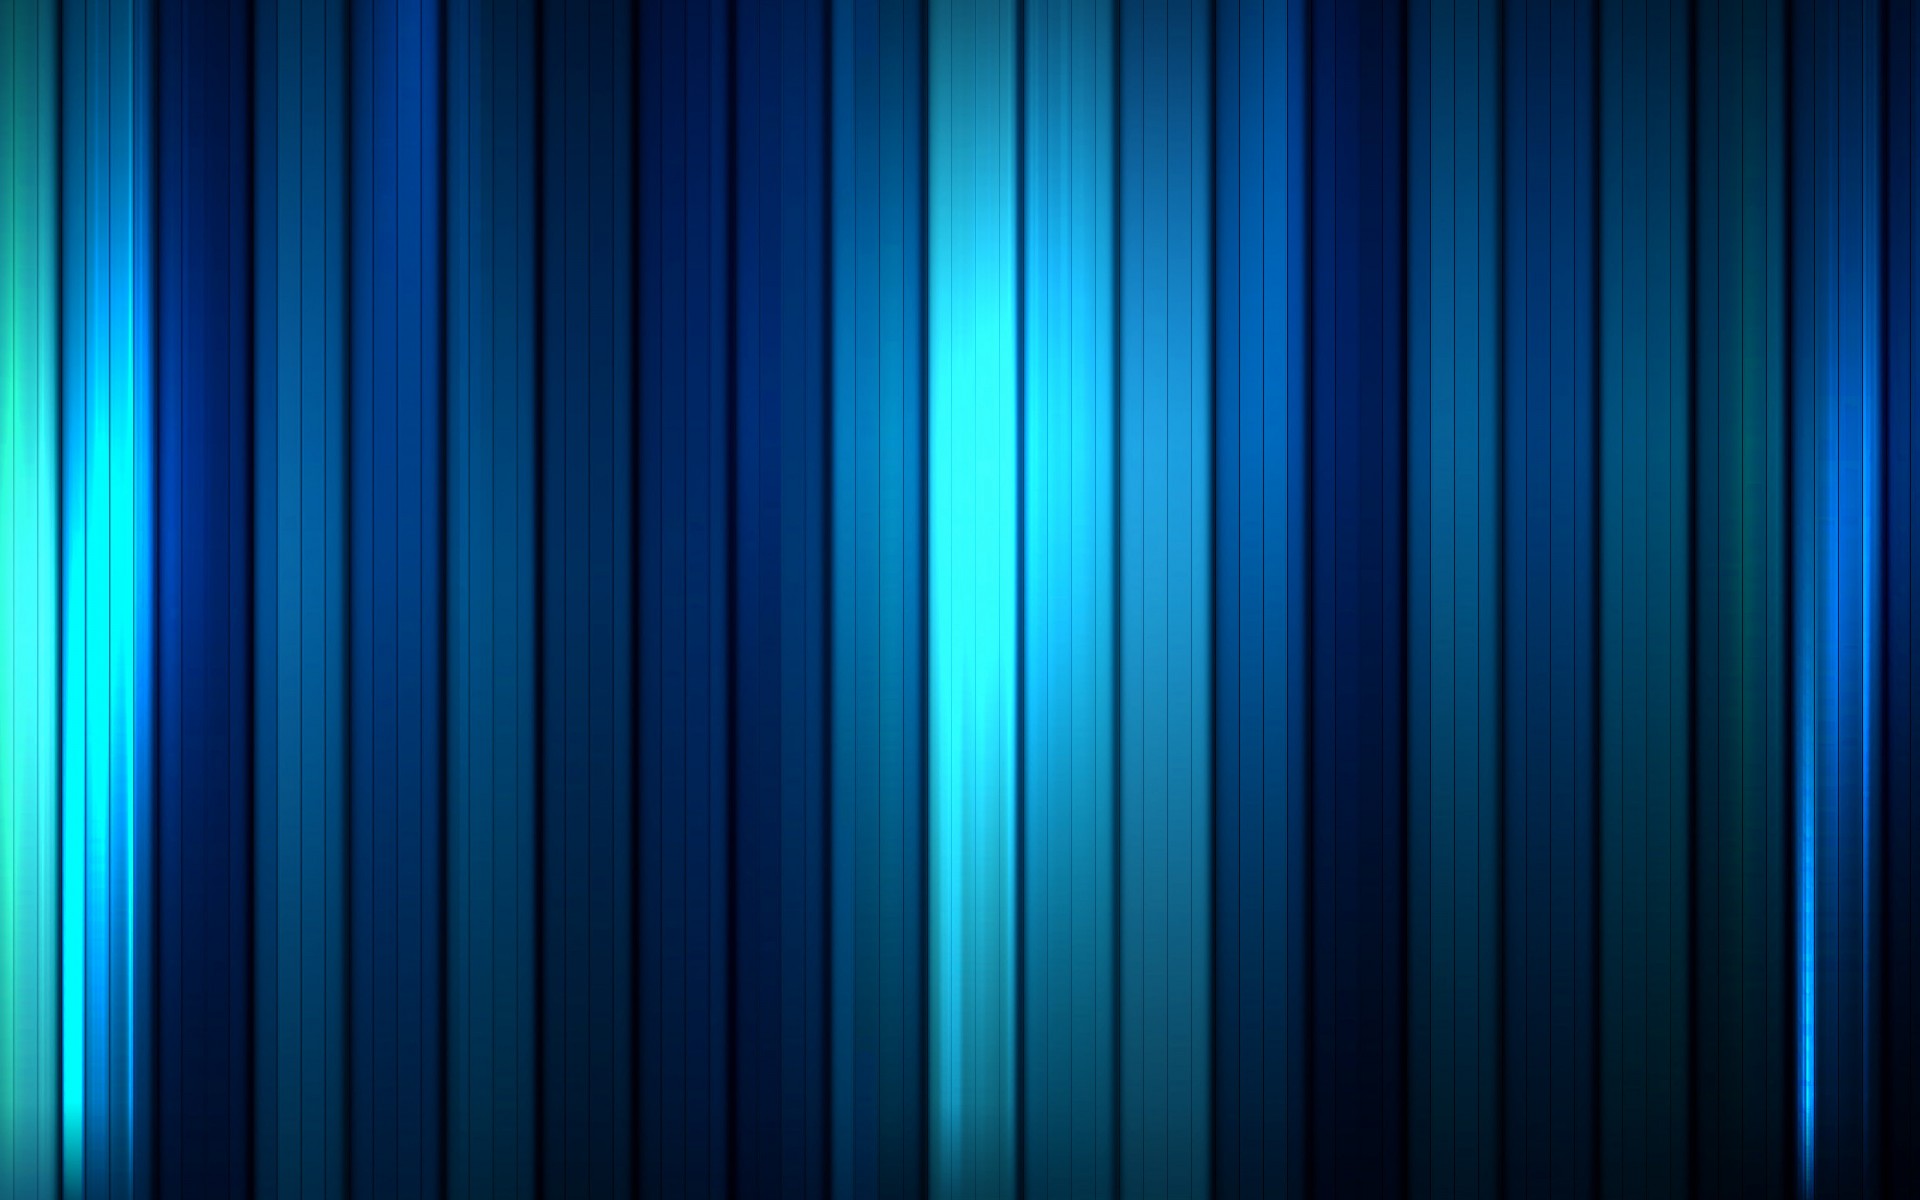 motion stripes of the strip line shades of blue